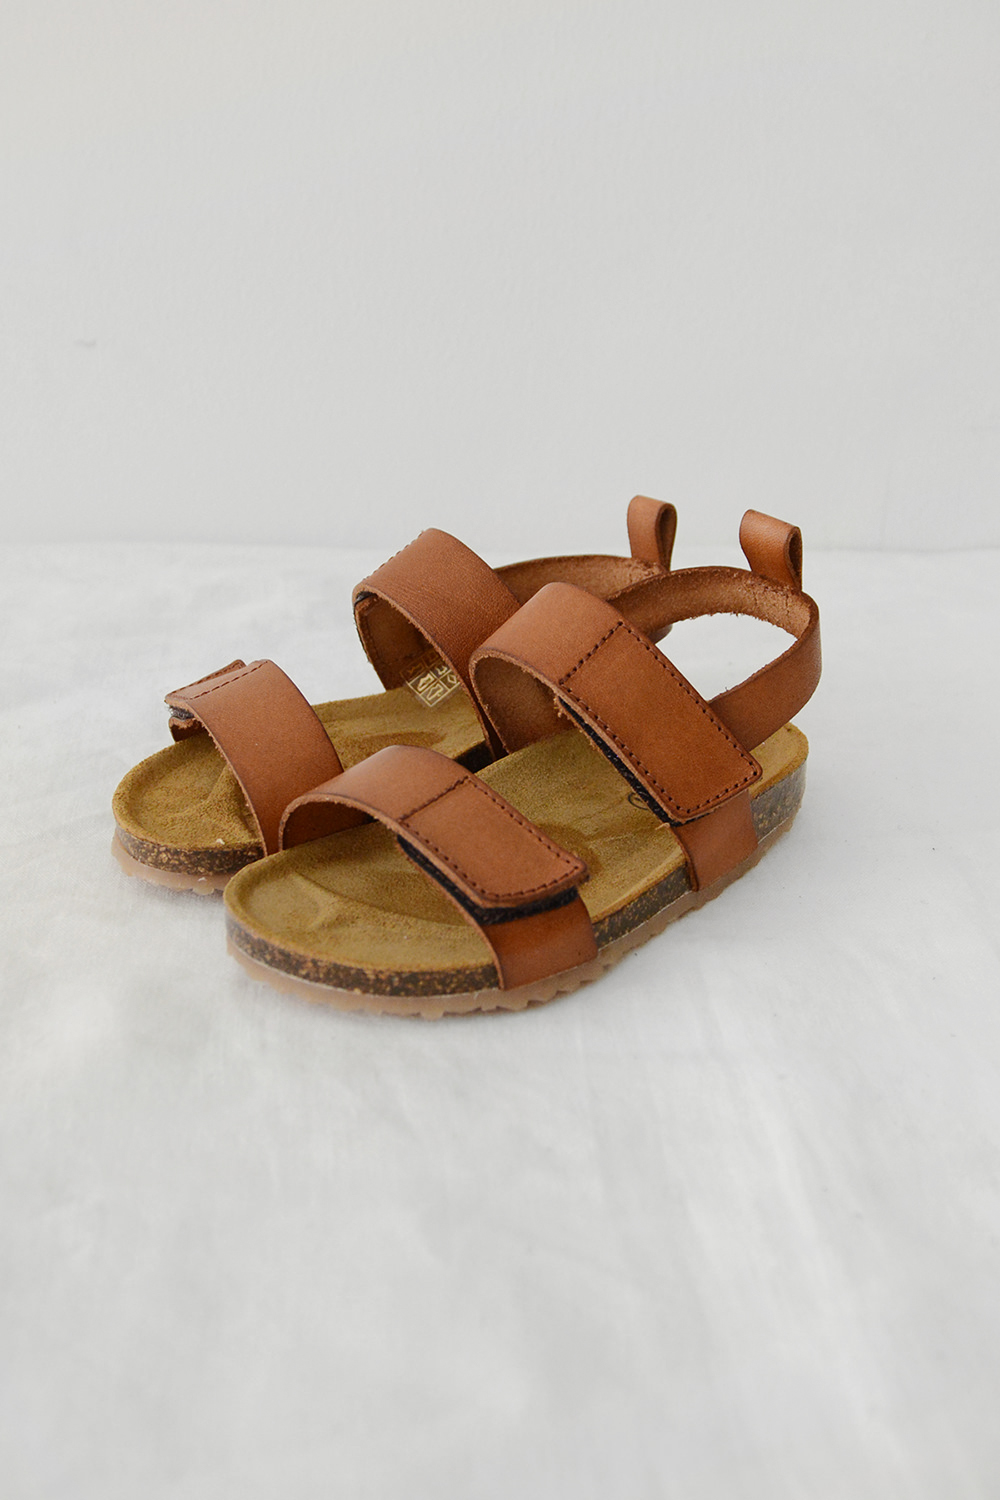 PePe Kid's Sandal Double Scratch Sandals Brown Top Picture